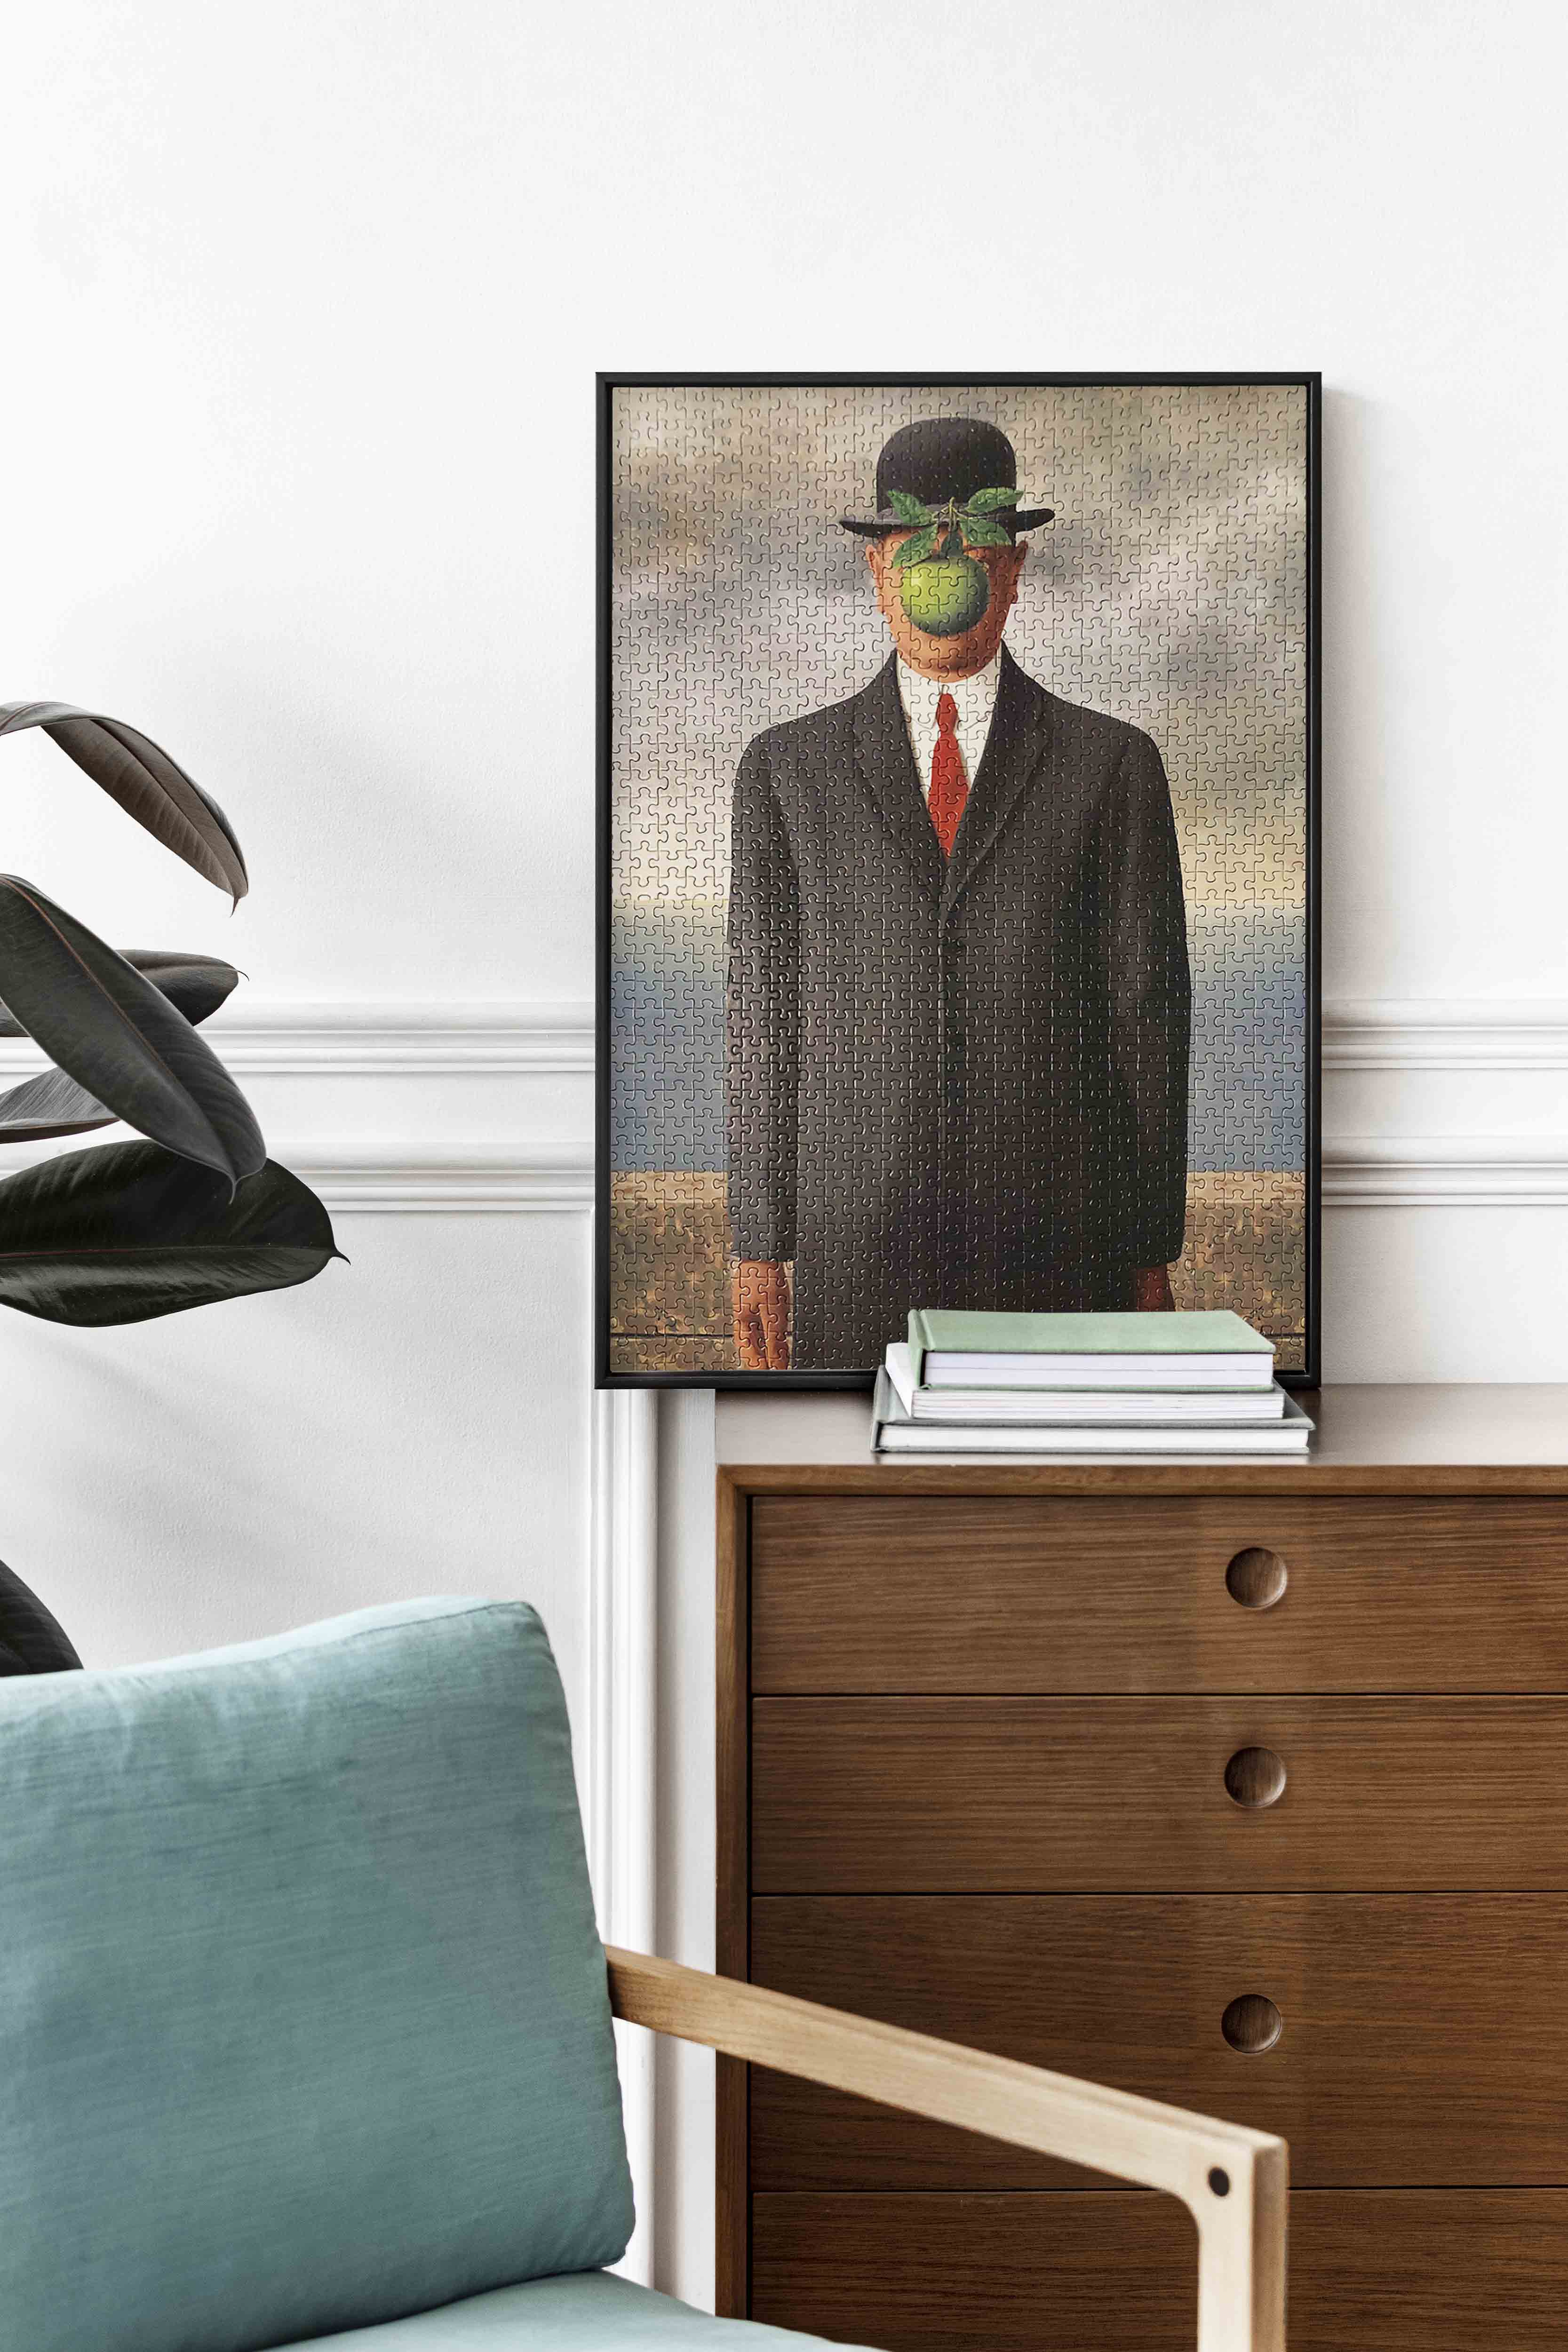 Magritte's Son of Man. Iconic surrealism painting with bowler hat and green apple. High-quality jigsaw puzzle for interior design and art lovers.